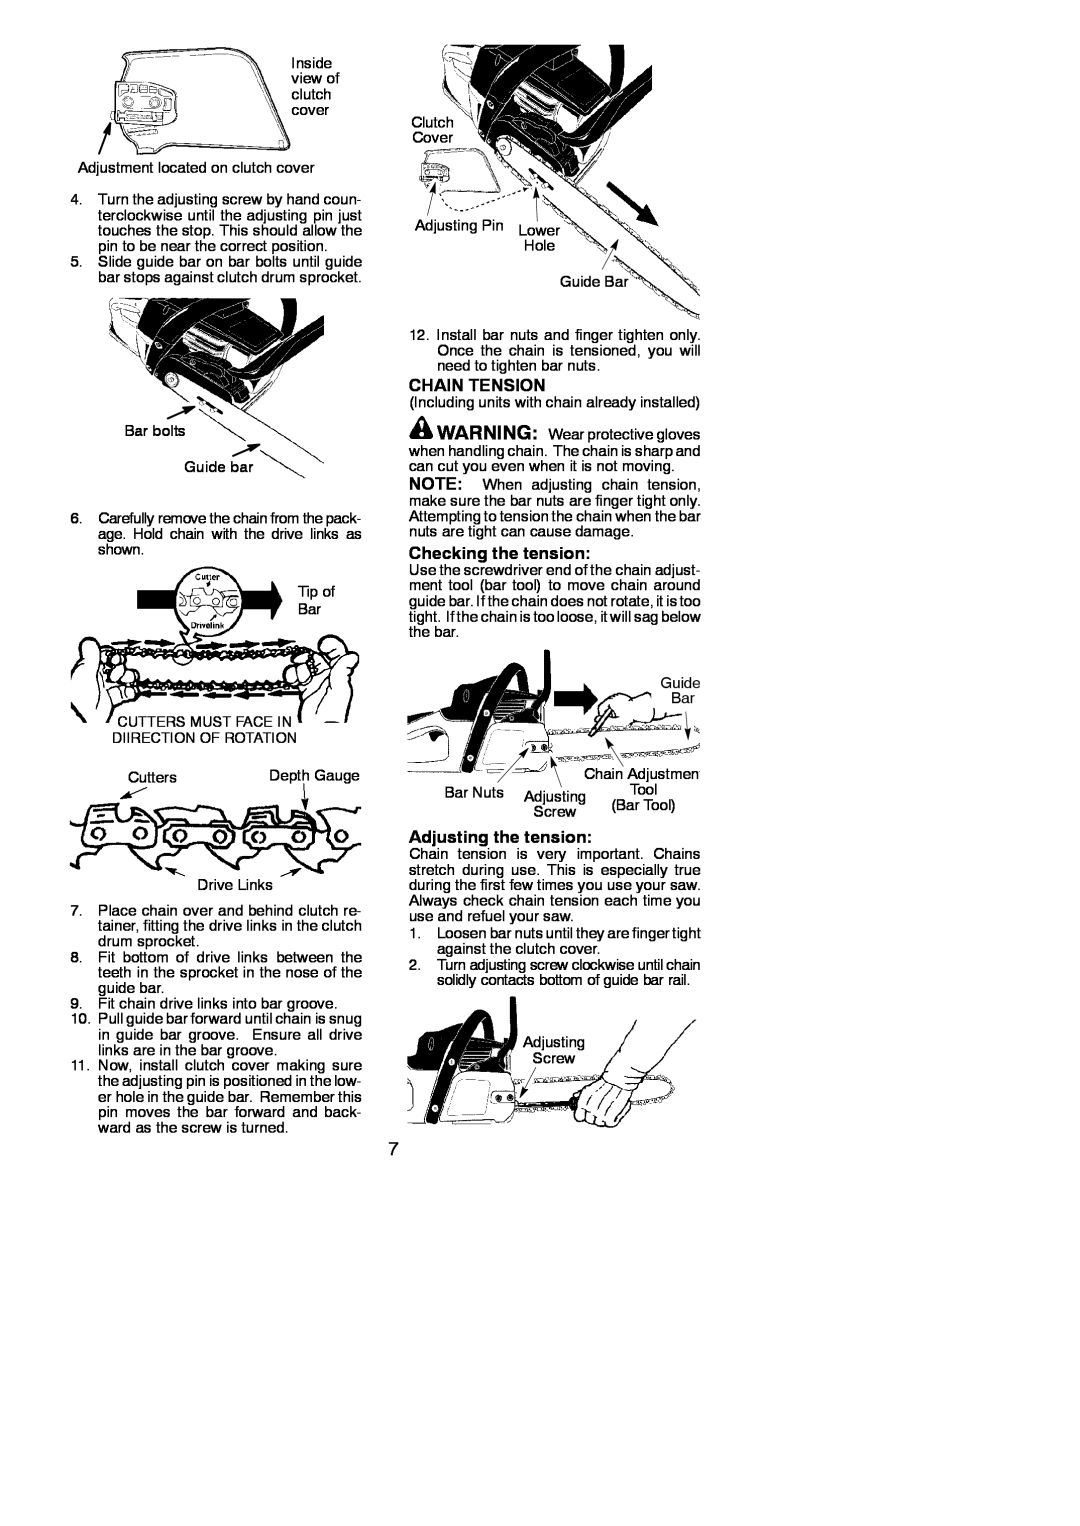 Poulan 545137224 instruction manual Chain Tension, Checking the tension, Adjusting the tension 